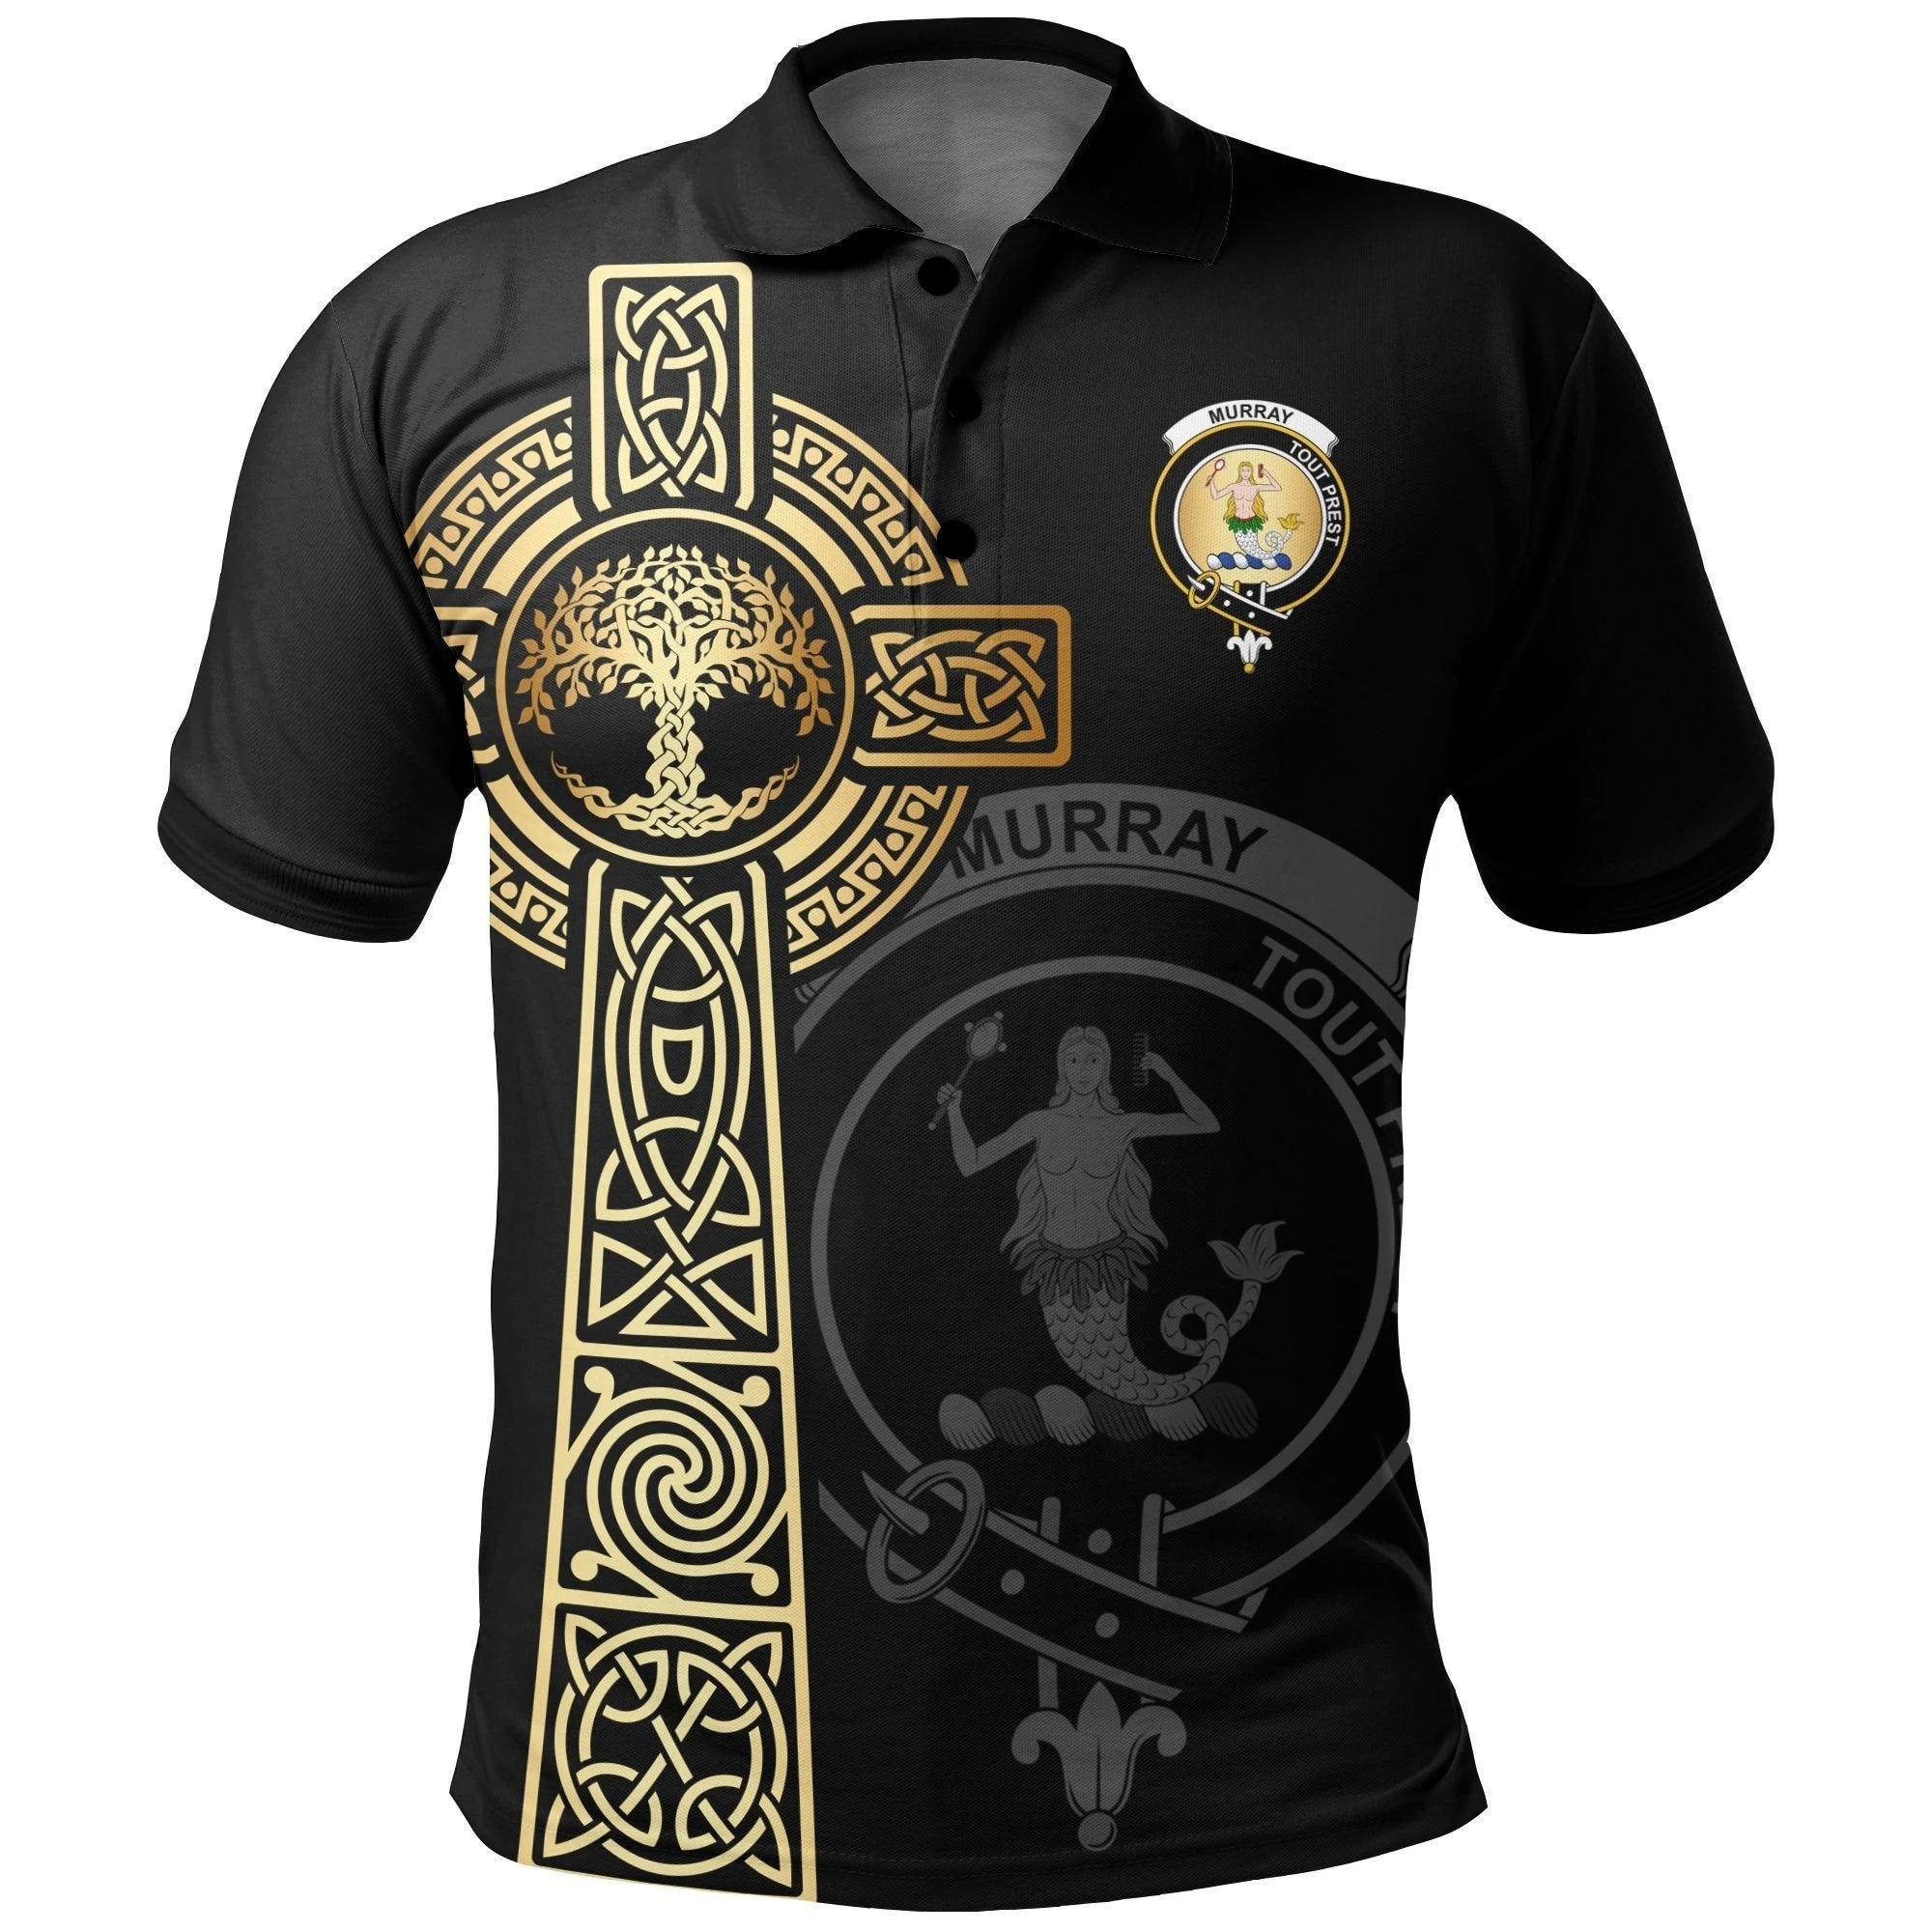 Murray (of Dysart) Clan Polo Shirt, Scottish Tartan Murray (of Dysart) Clans Polo Shirt Tree Of Life Style